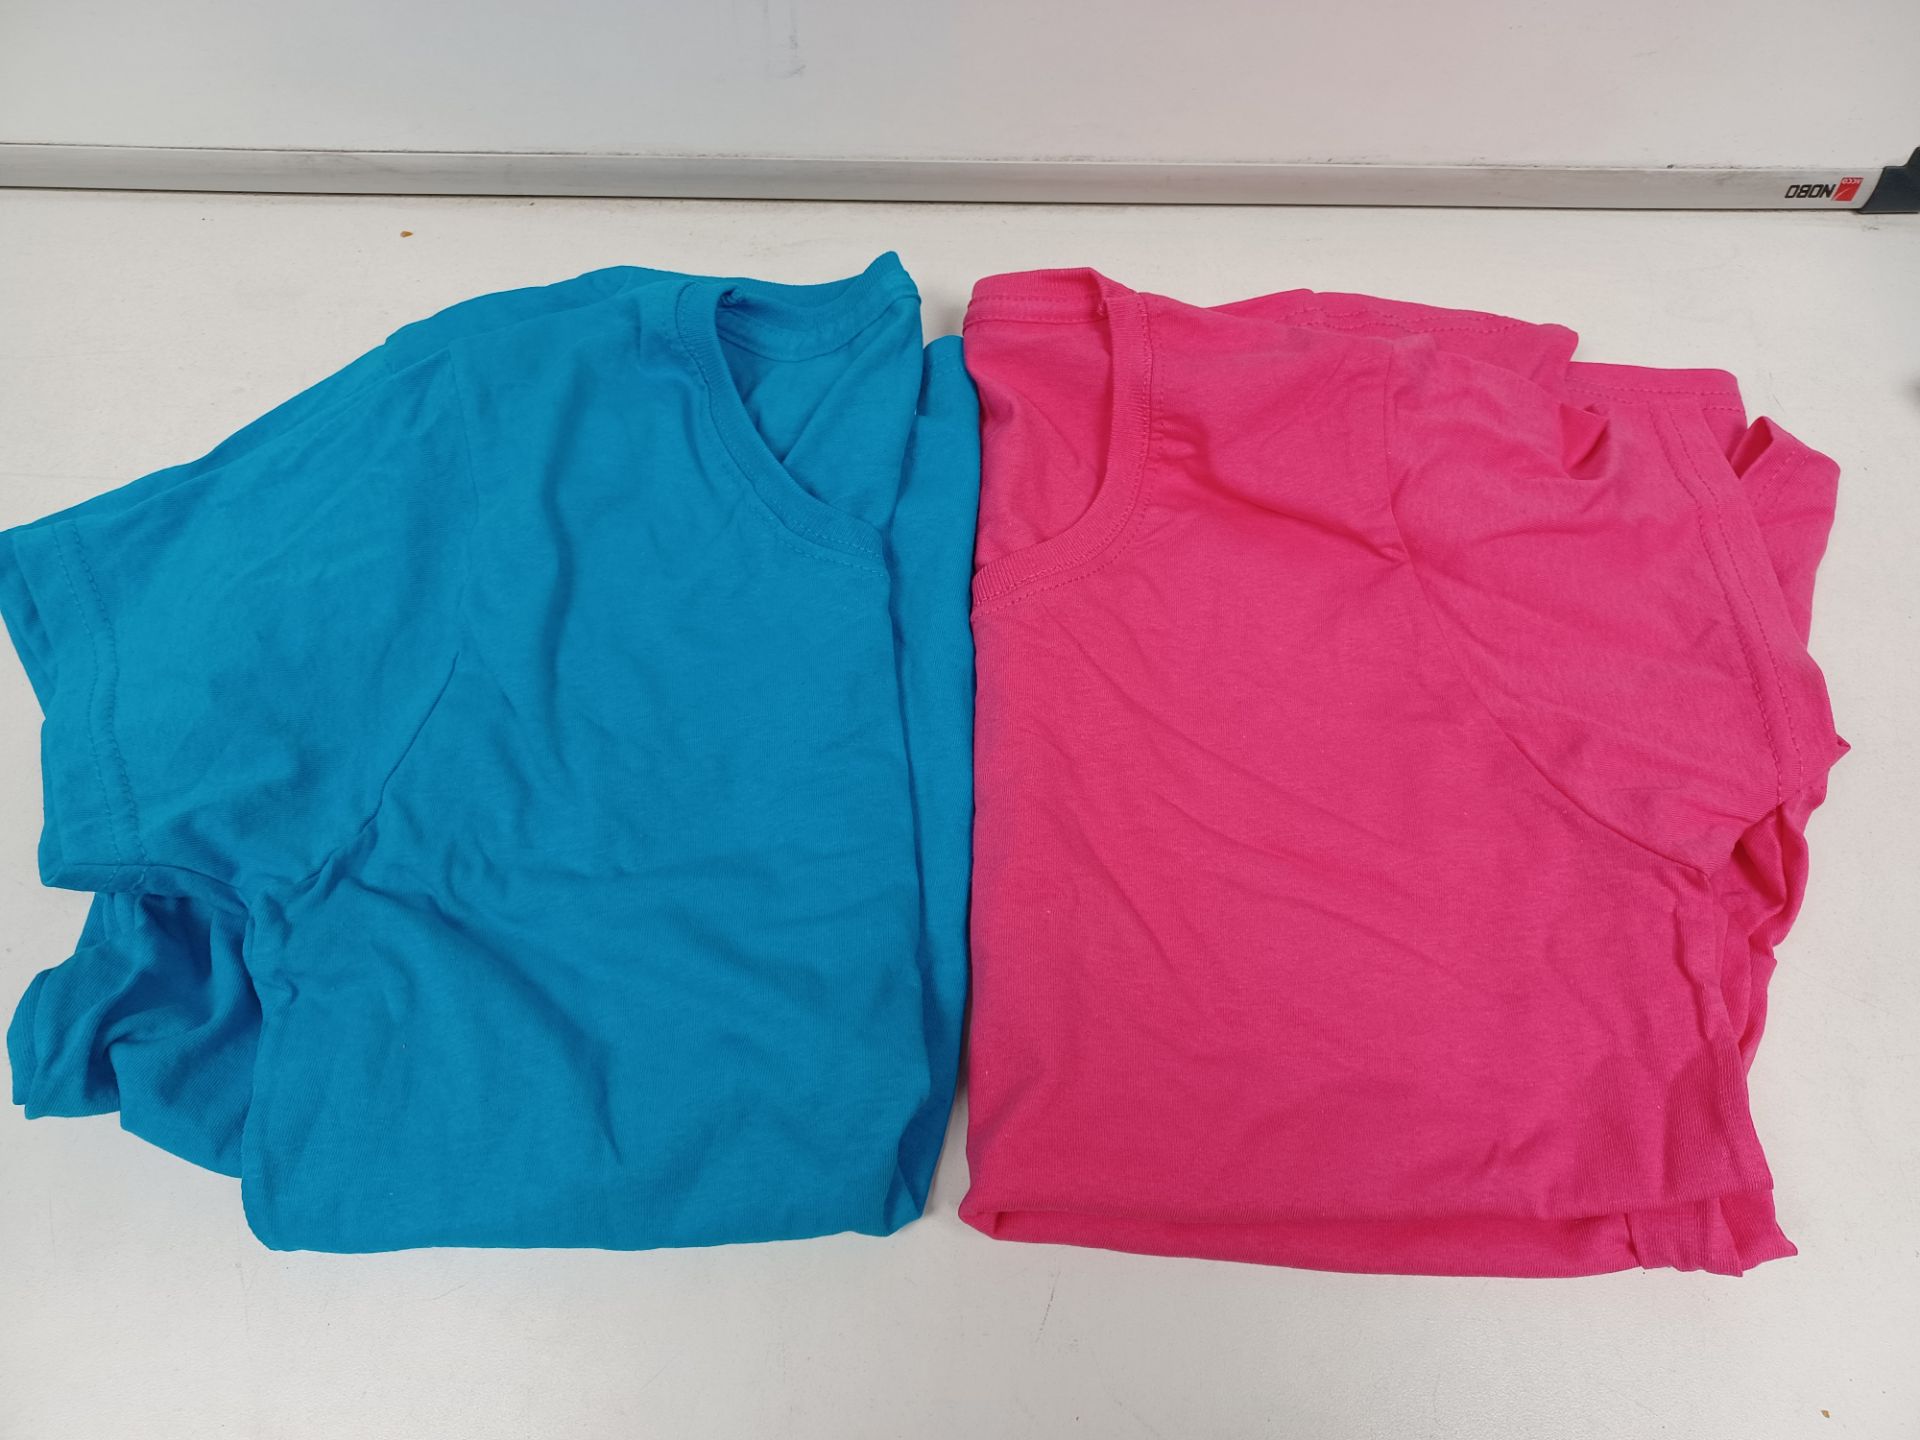 100 X BRAND NEW FRUIT OF THE LOOM TOPS IN VARIOUS COLOURS AND SIZES R1-5